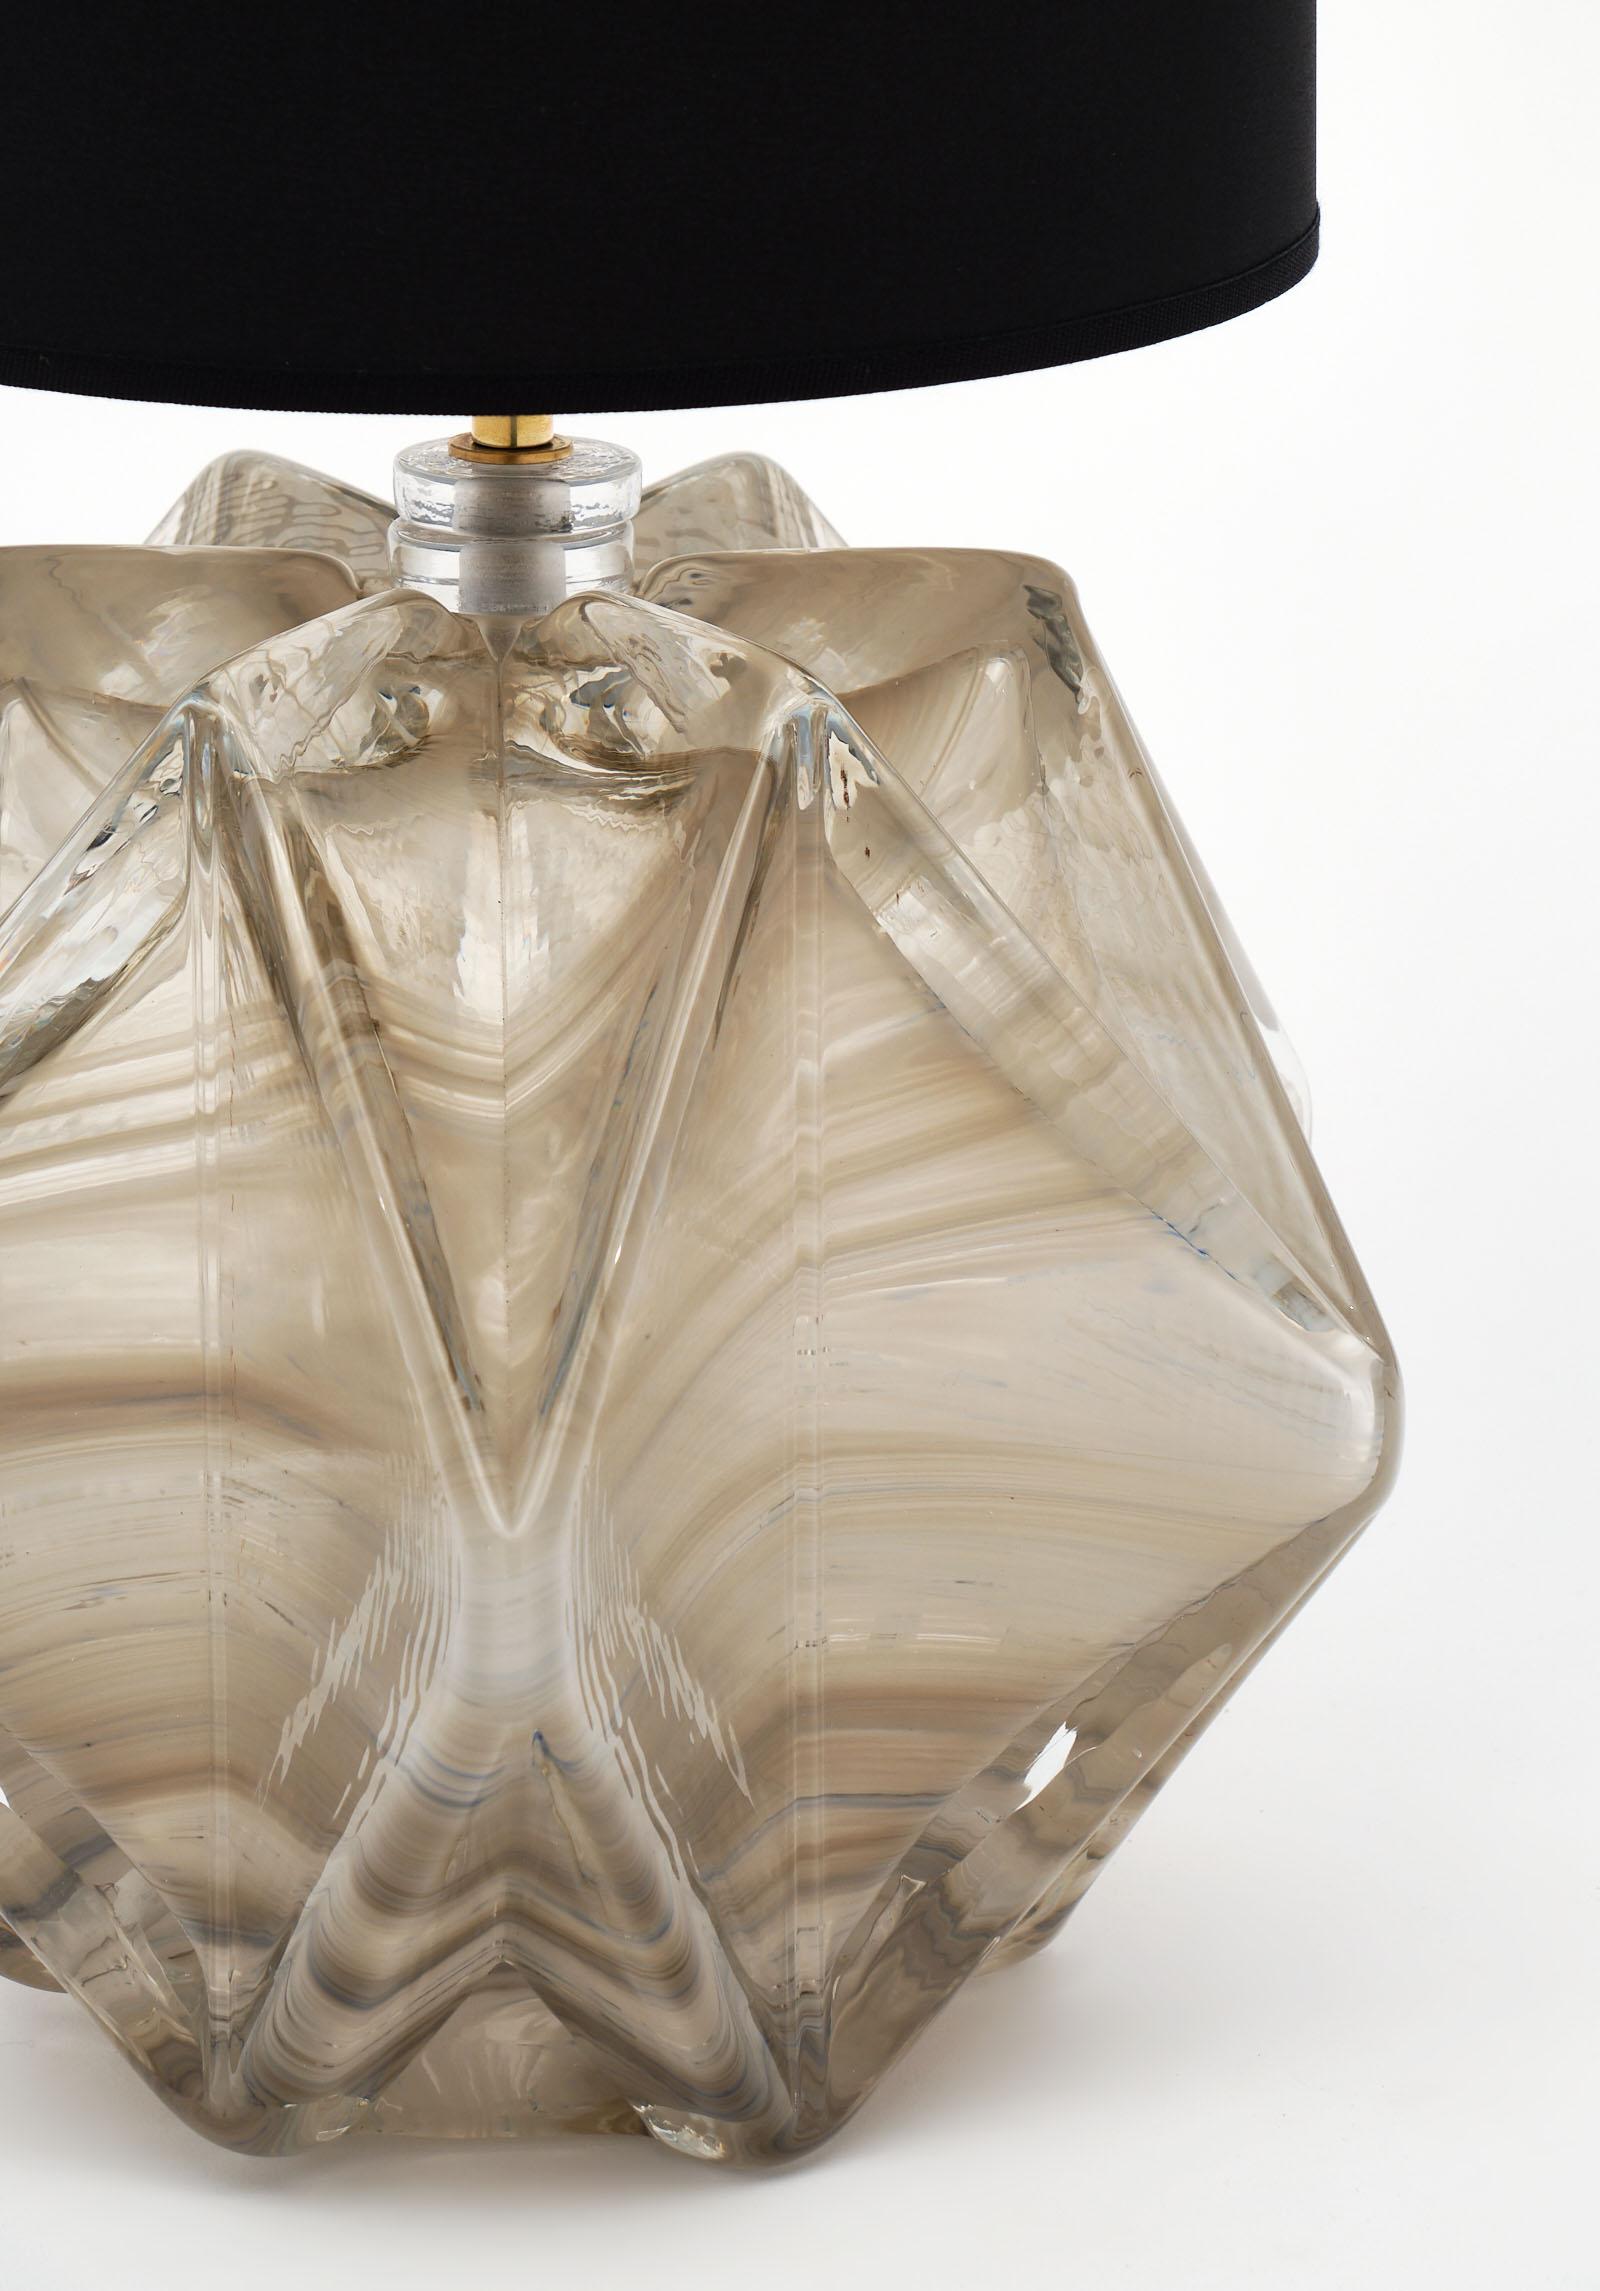 Italian Modernist Murano Glass Lamps by Donghia